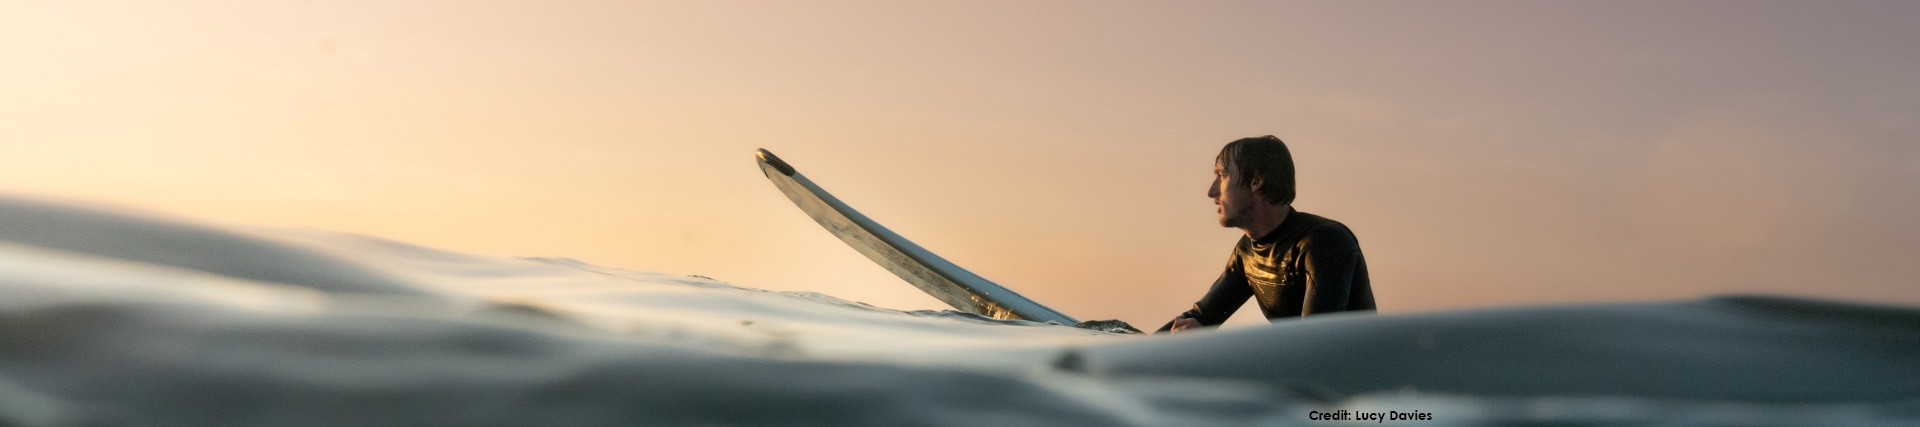 A surfer stands in the sea waiting for a wave against a pale yellow sky; photo credit Lucy Davies.